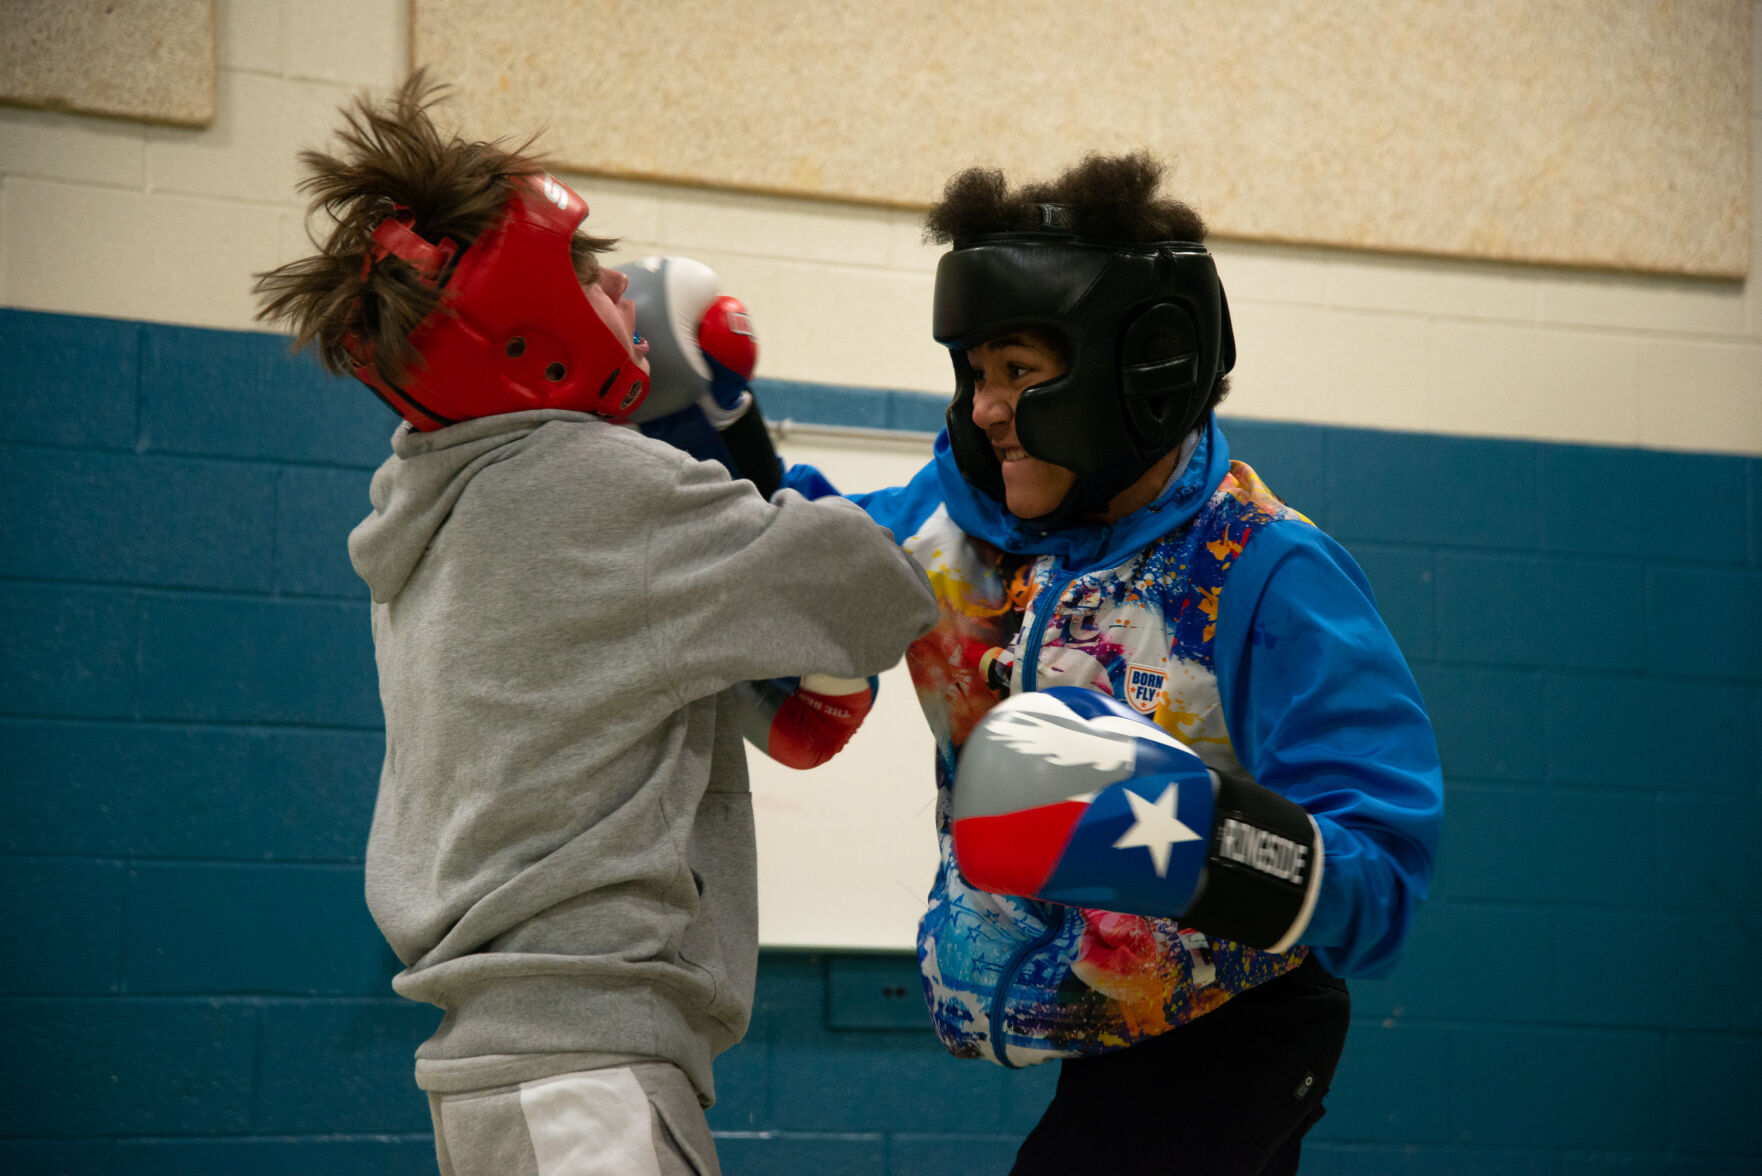 Former Team USA athlete teaches boxing to help local youth Sports montanakaimin